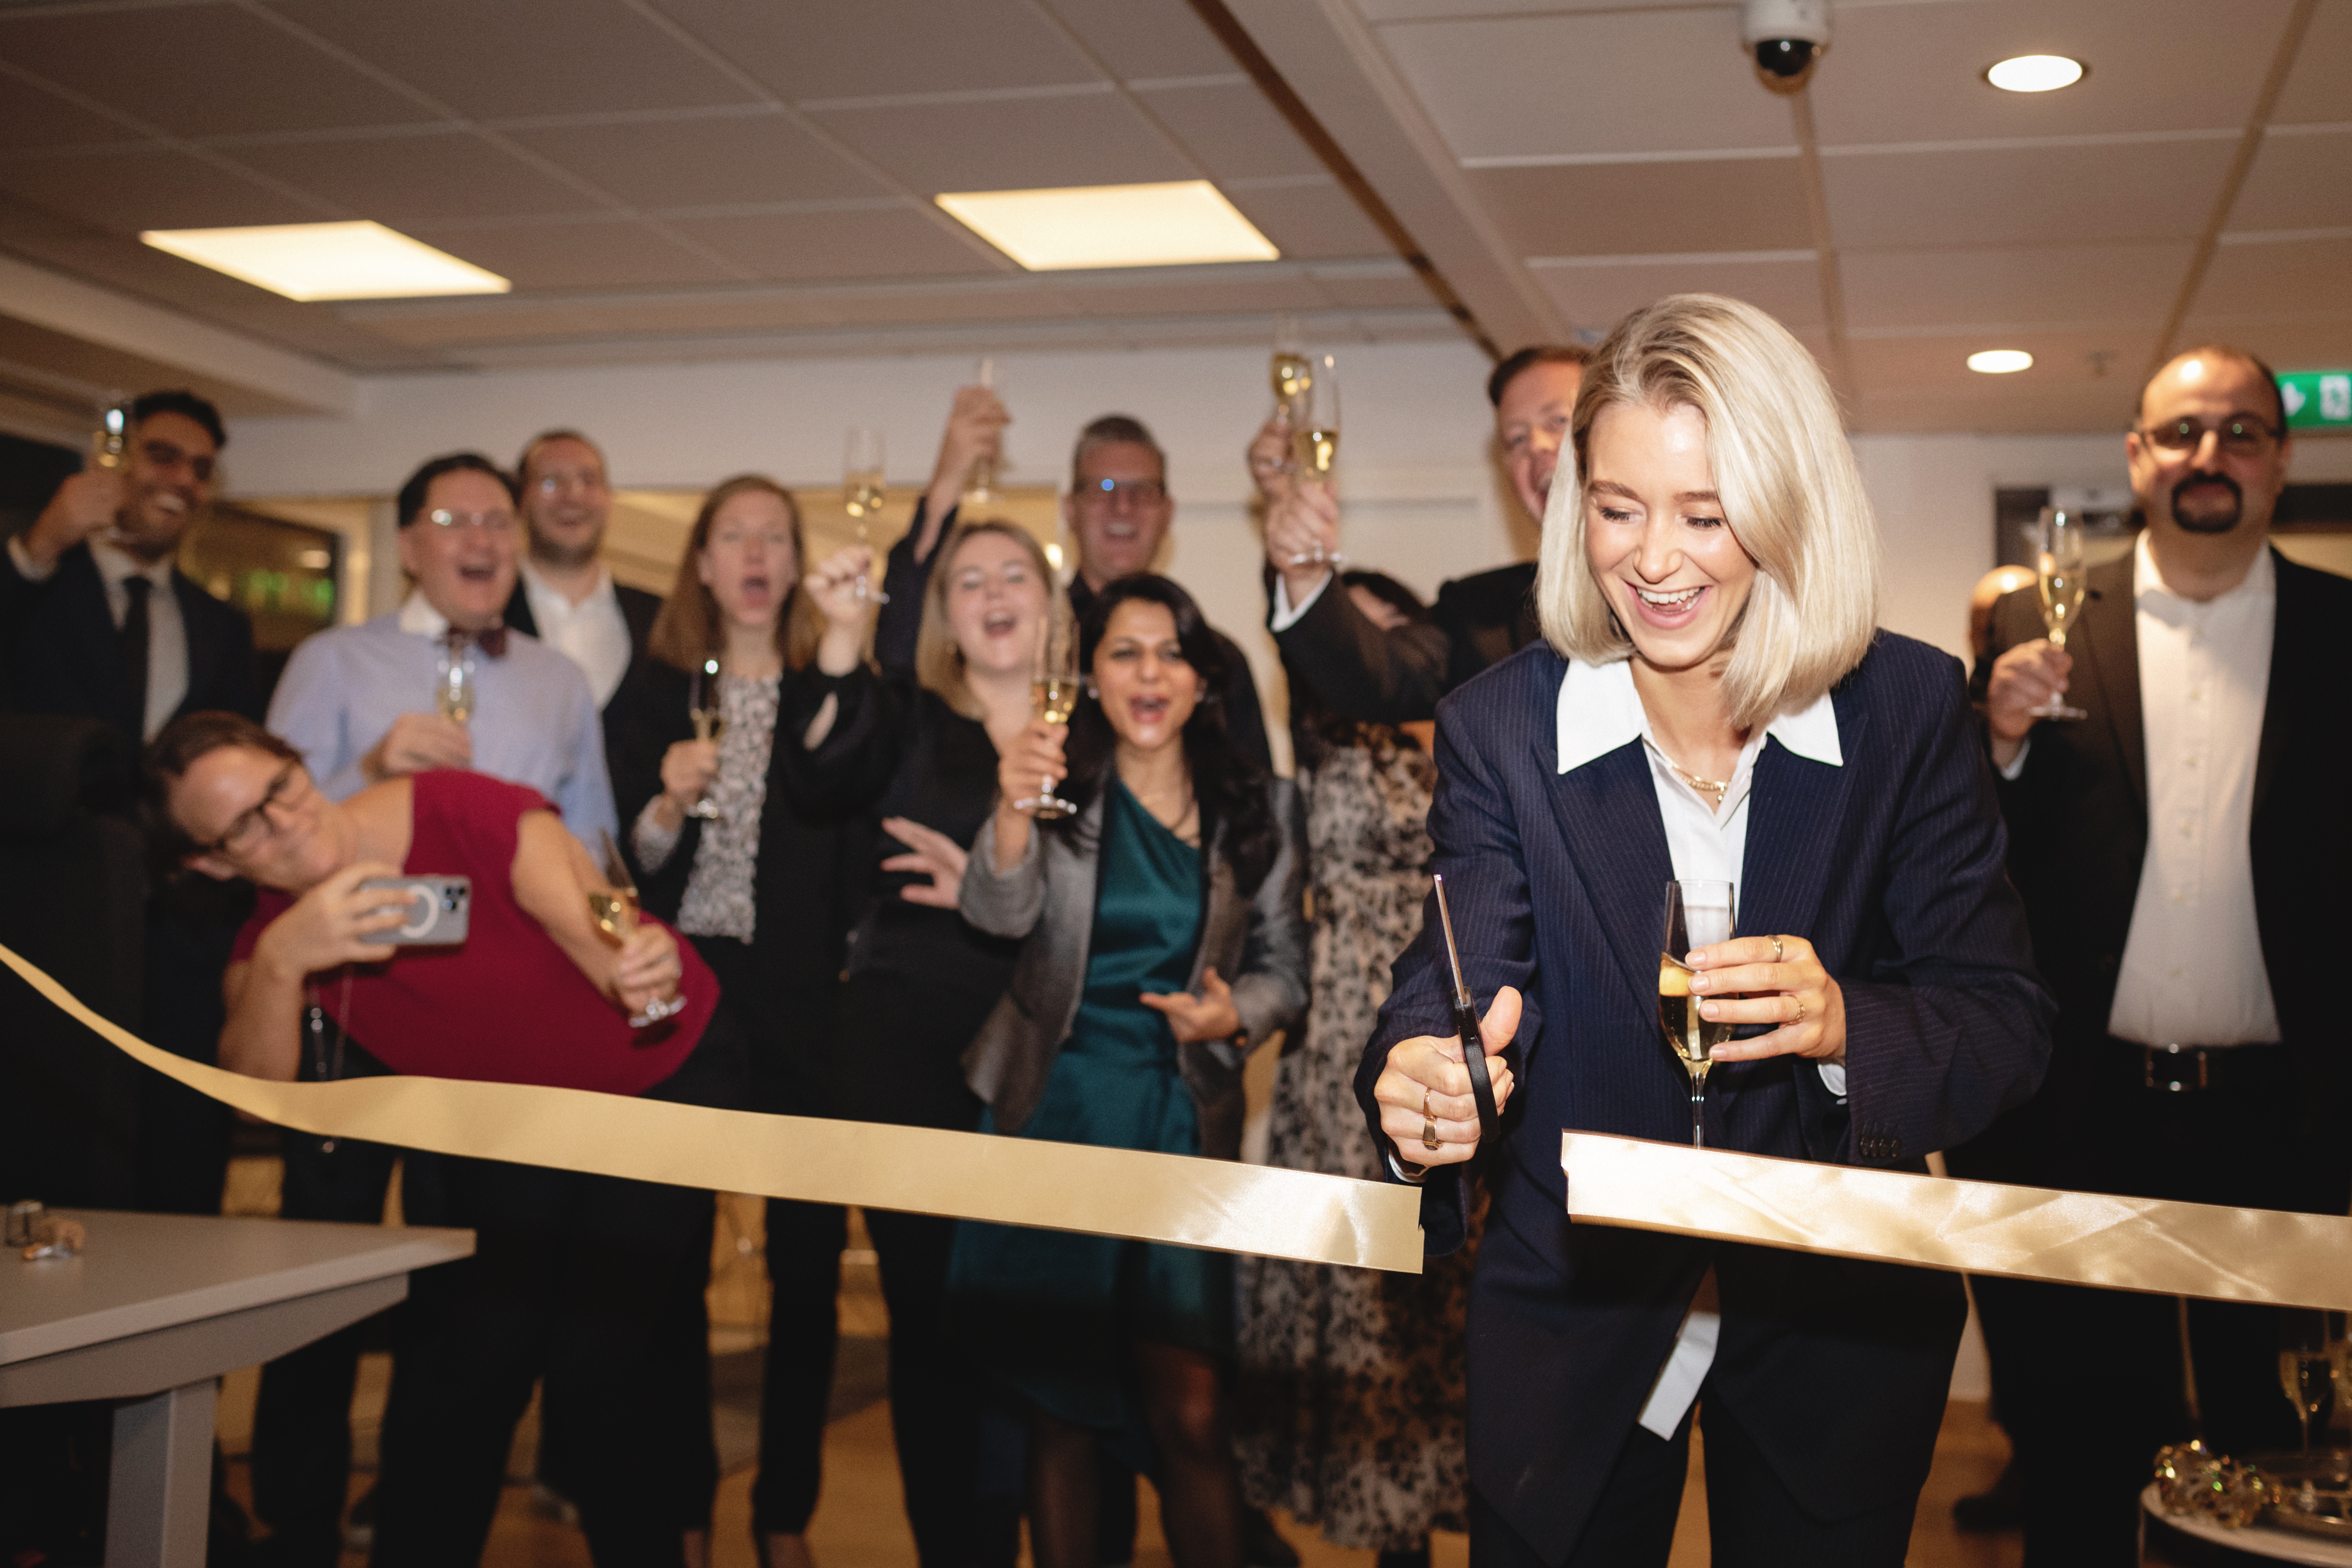 Andersson cuts a ribbon at an event as colleagues celebrate behind her. 